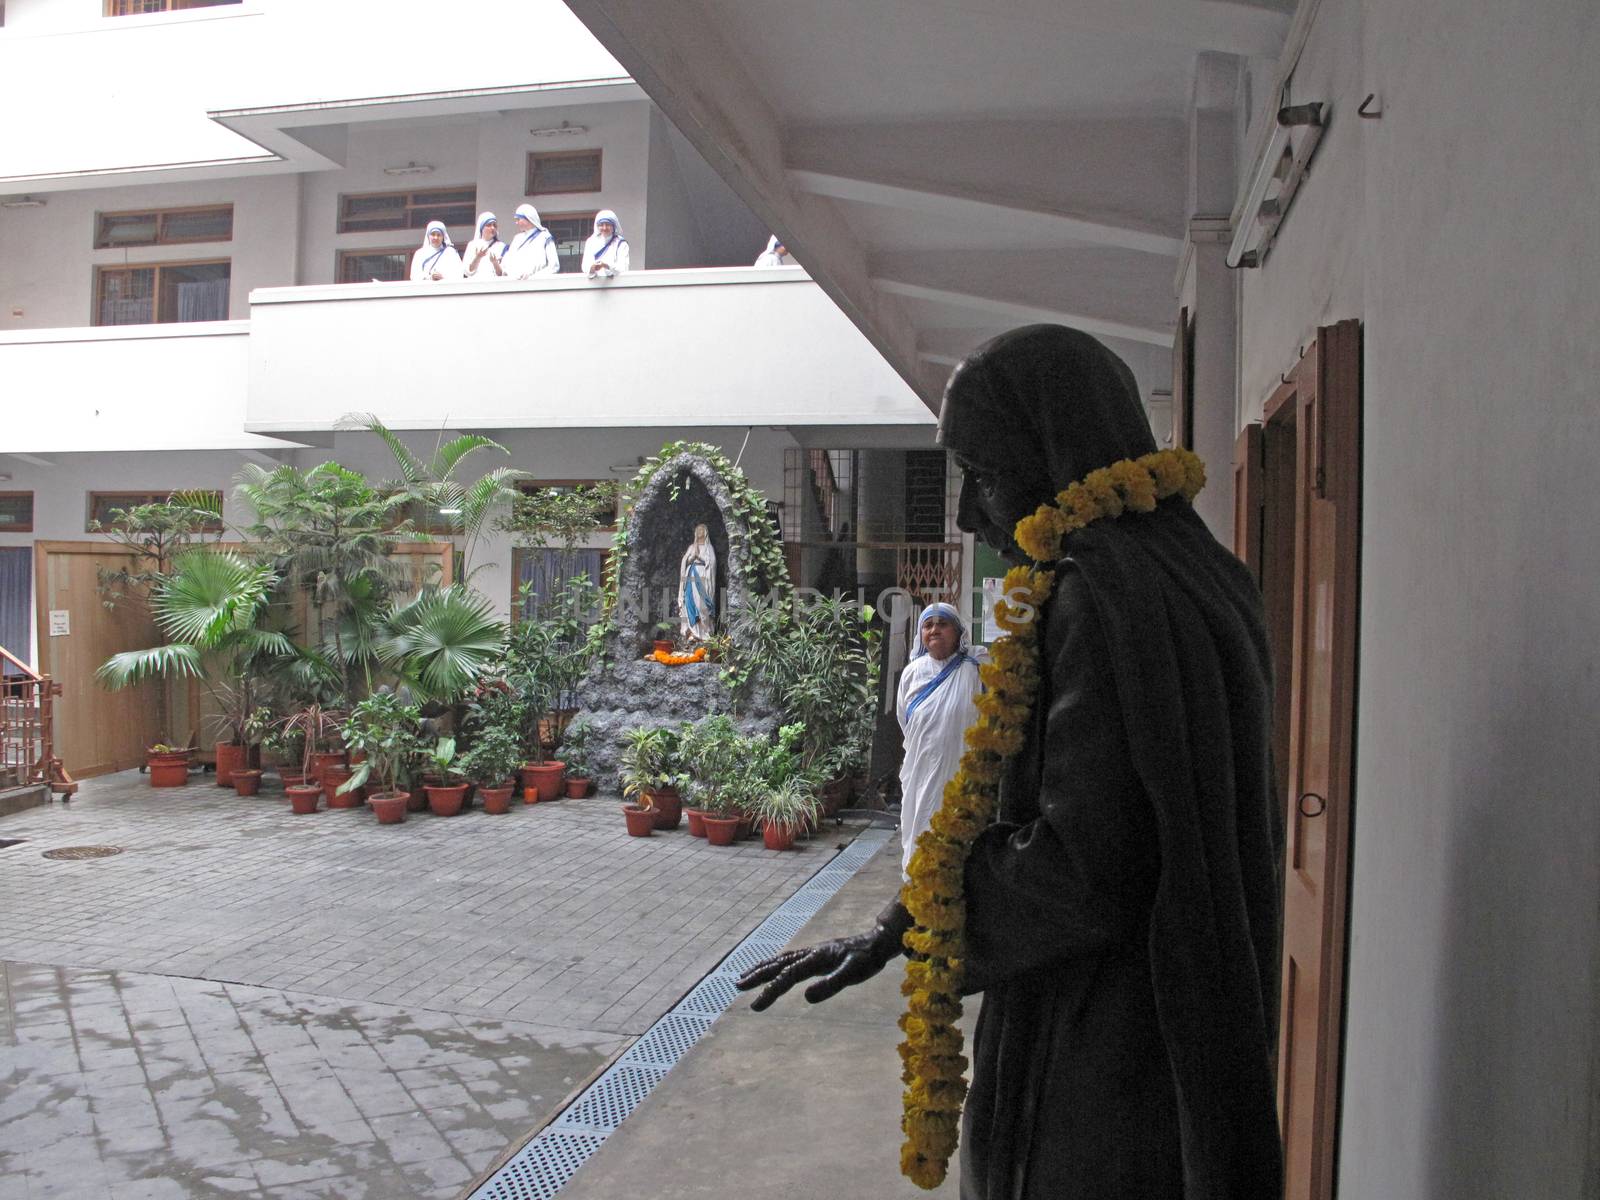 Mother House, the residence of Mother Teresa and headquarters of Missionaries of Charity in Kolkata, West Bengal, India on January 27,2009.